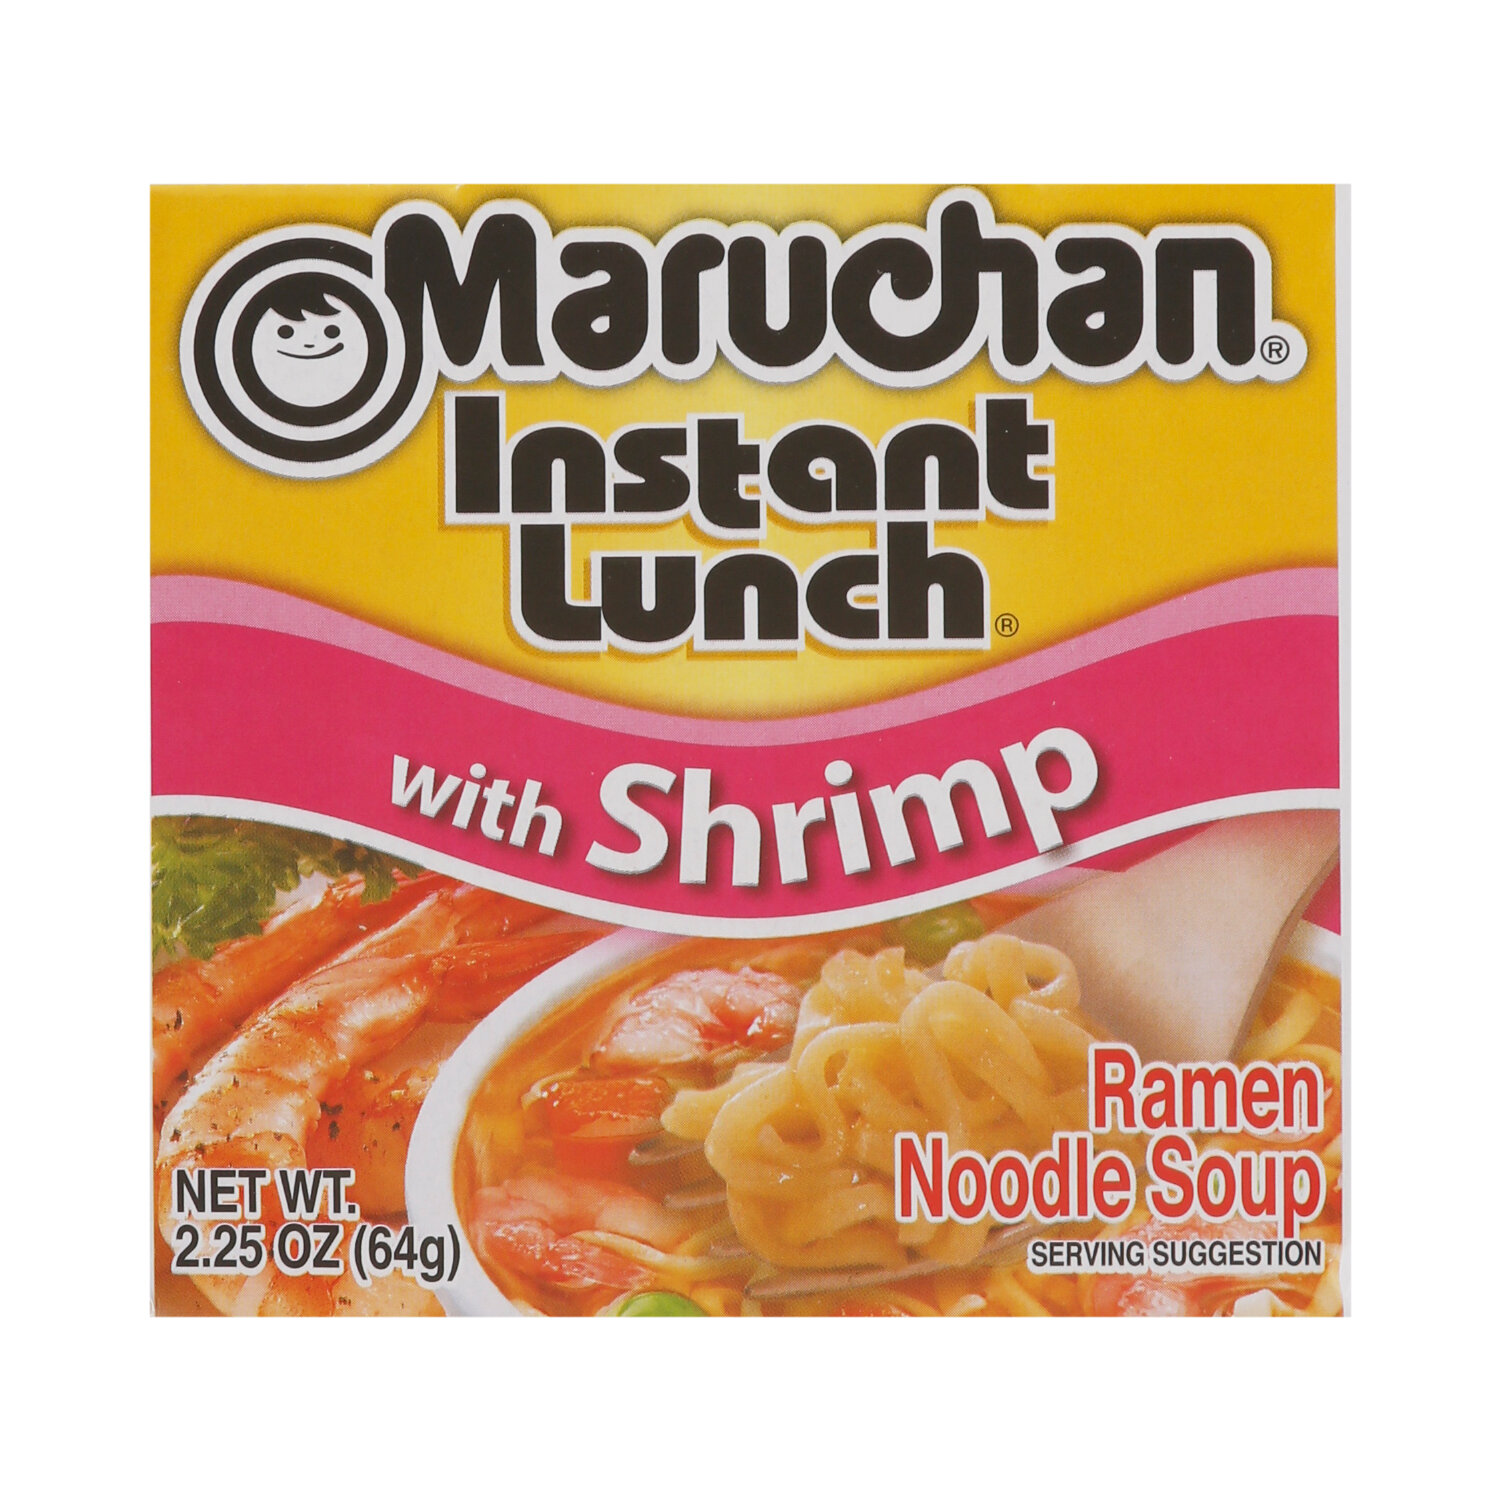 Save on Maruchan Instant Lunch Ramen Noodle Soup Cheddar Cheese Flavor  Order Online Delivery